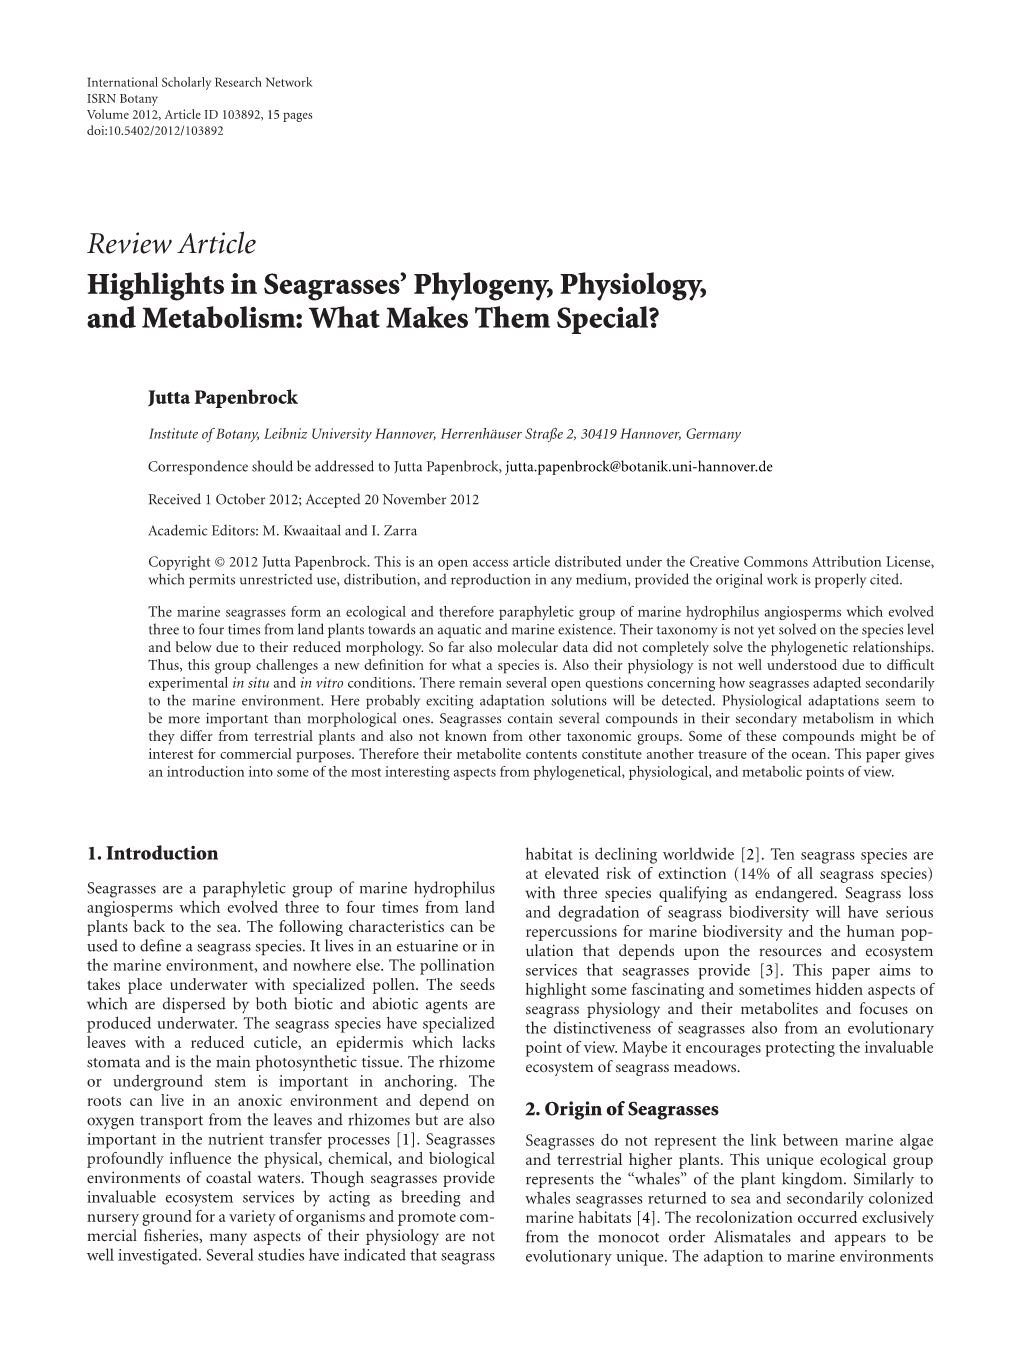 Highlights in Seagrasses' Phylogeny, Physiology, and Metabolism: What